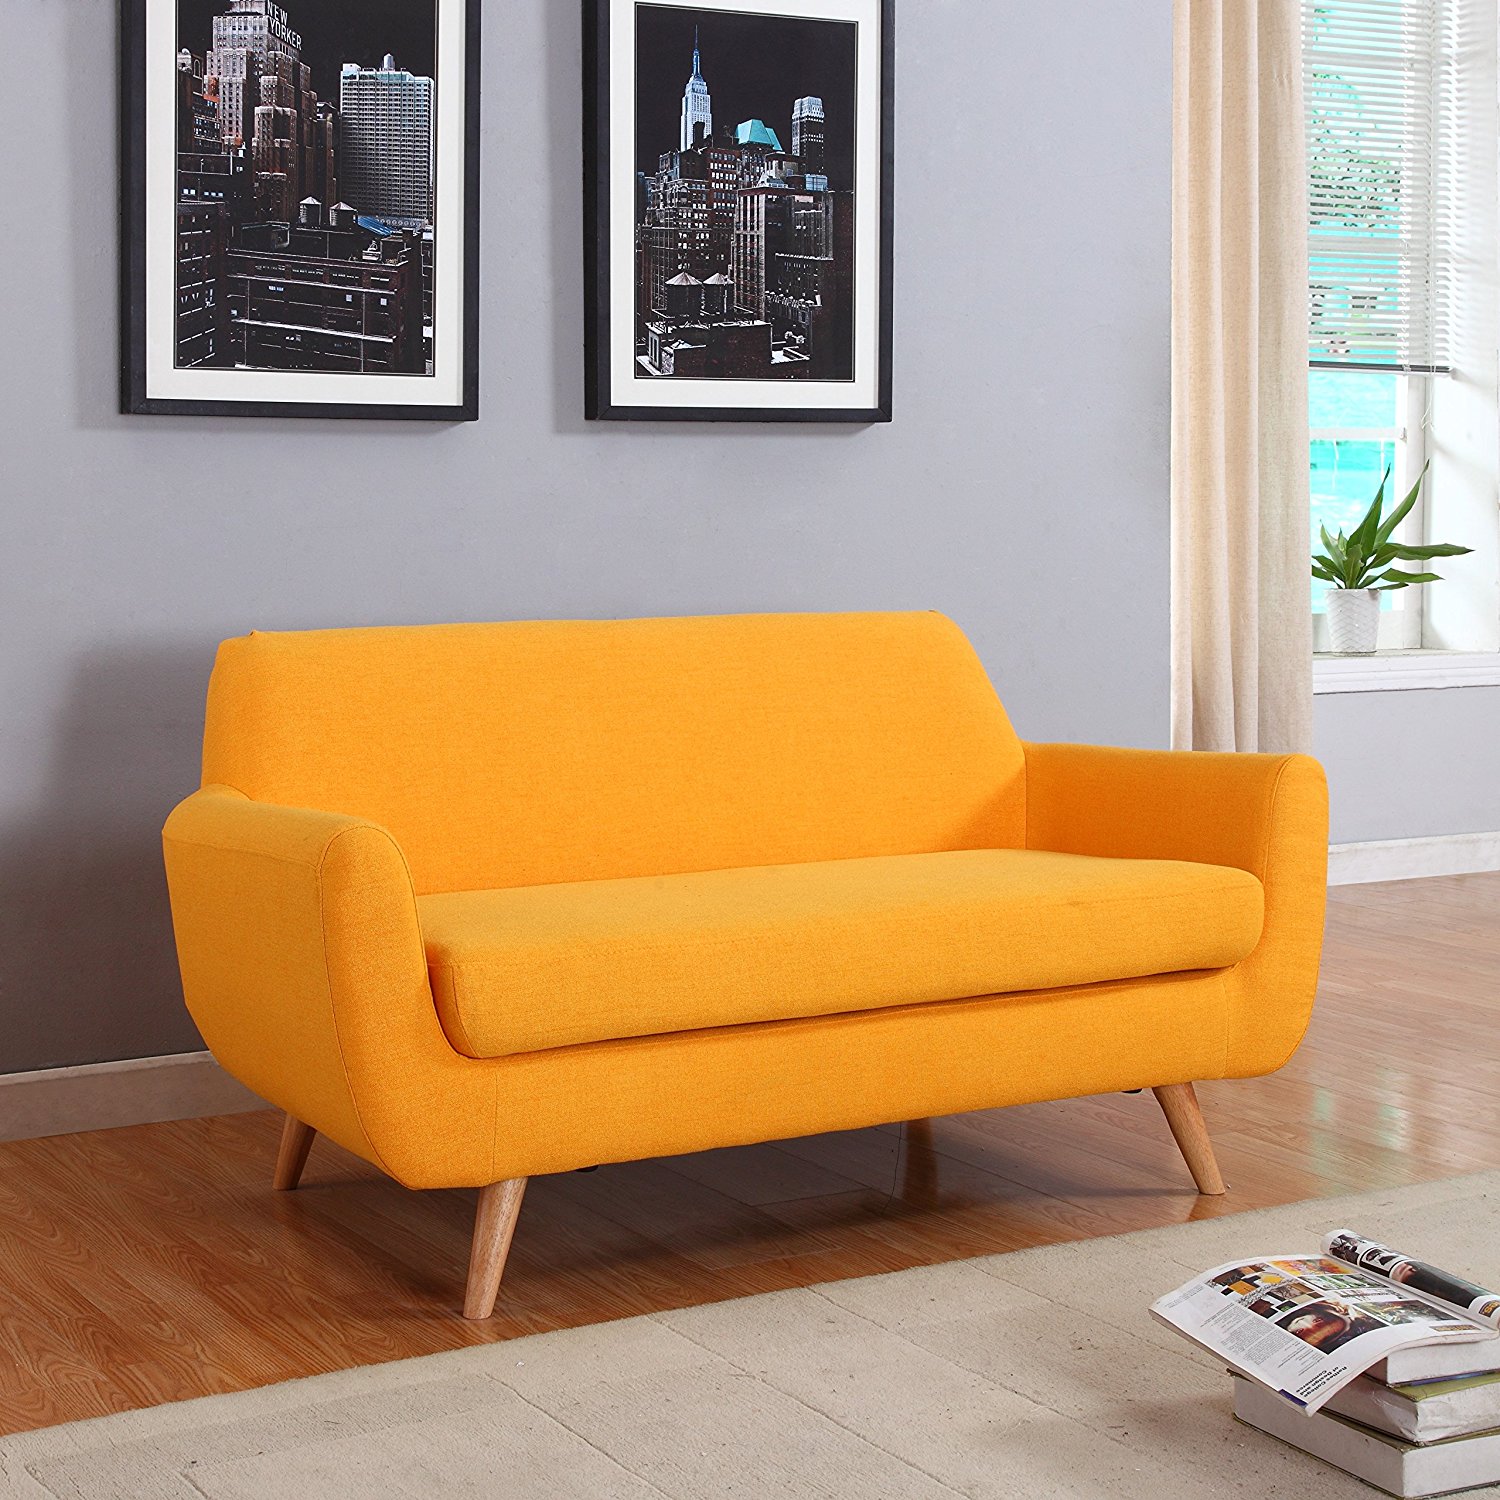 Sofa-in-an-almost-orange-shade-of-yellow-within-a-modern-living-room